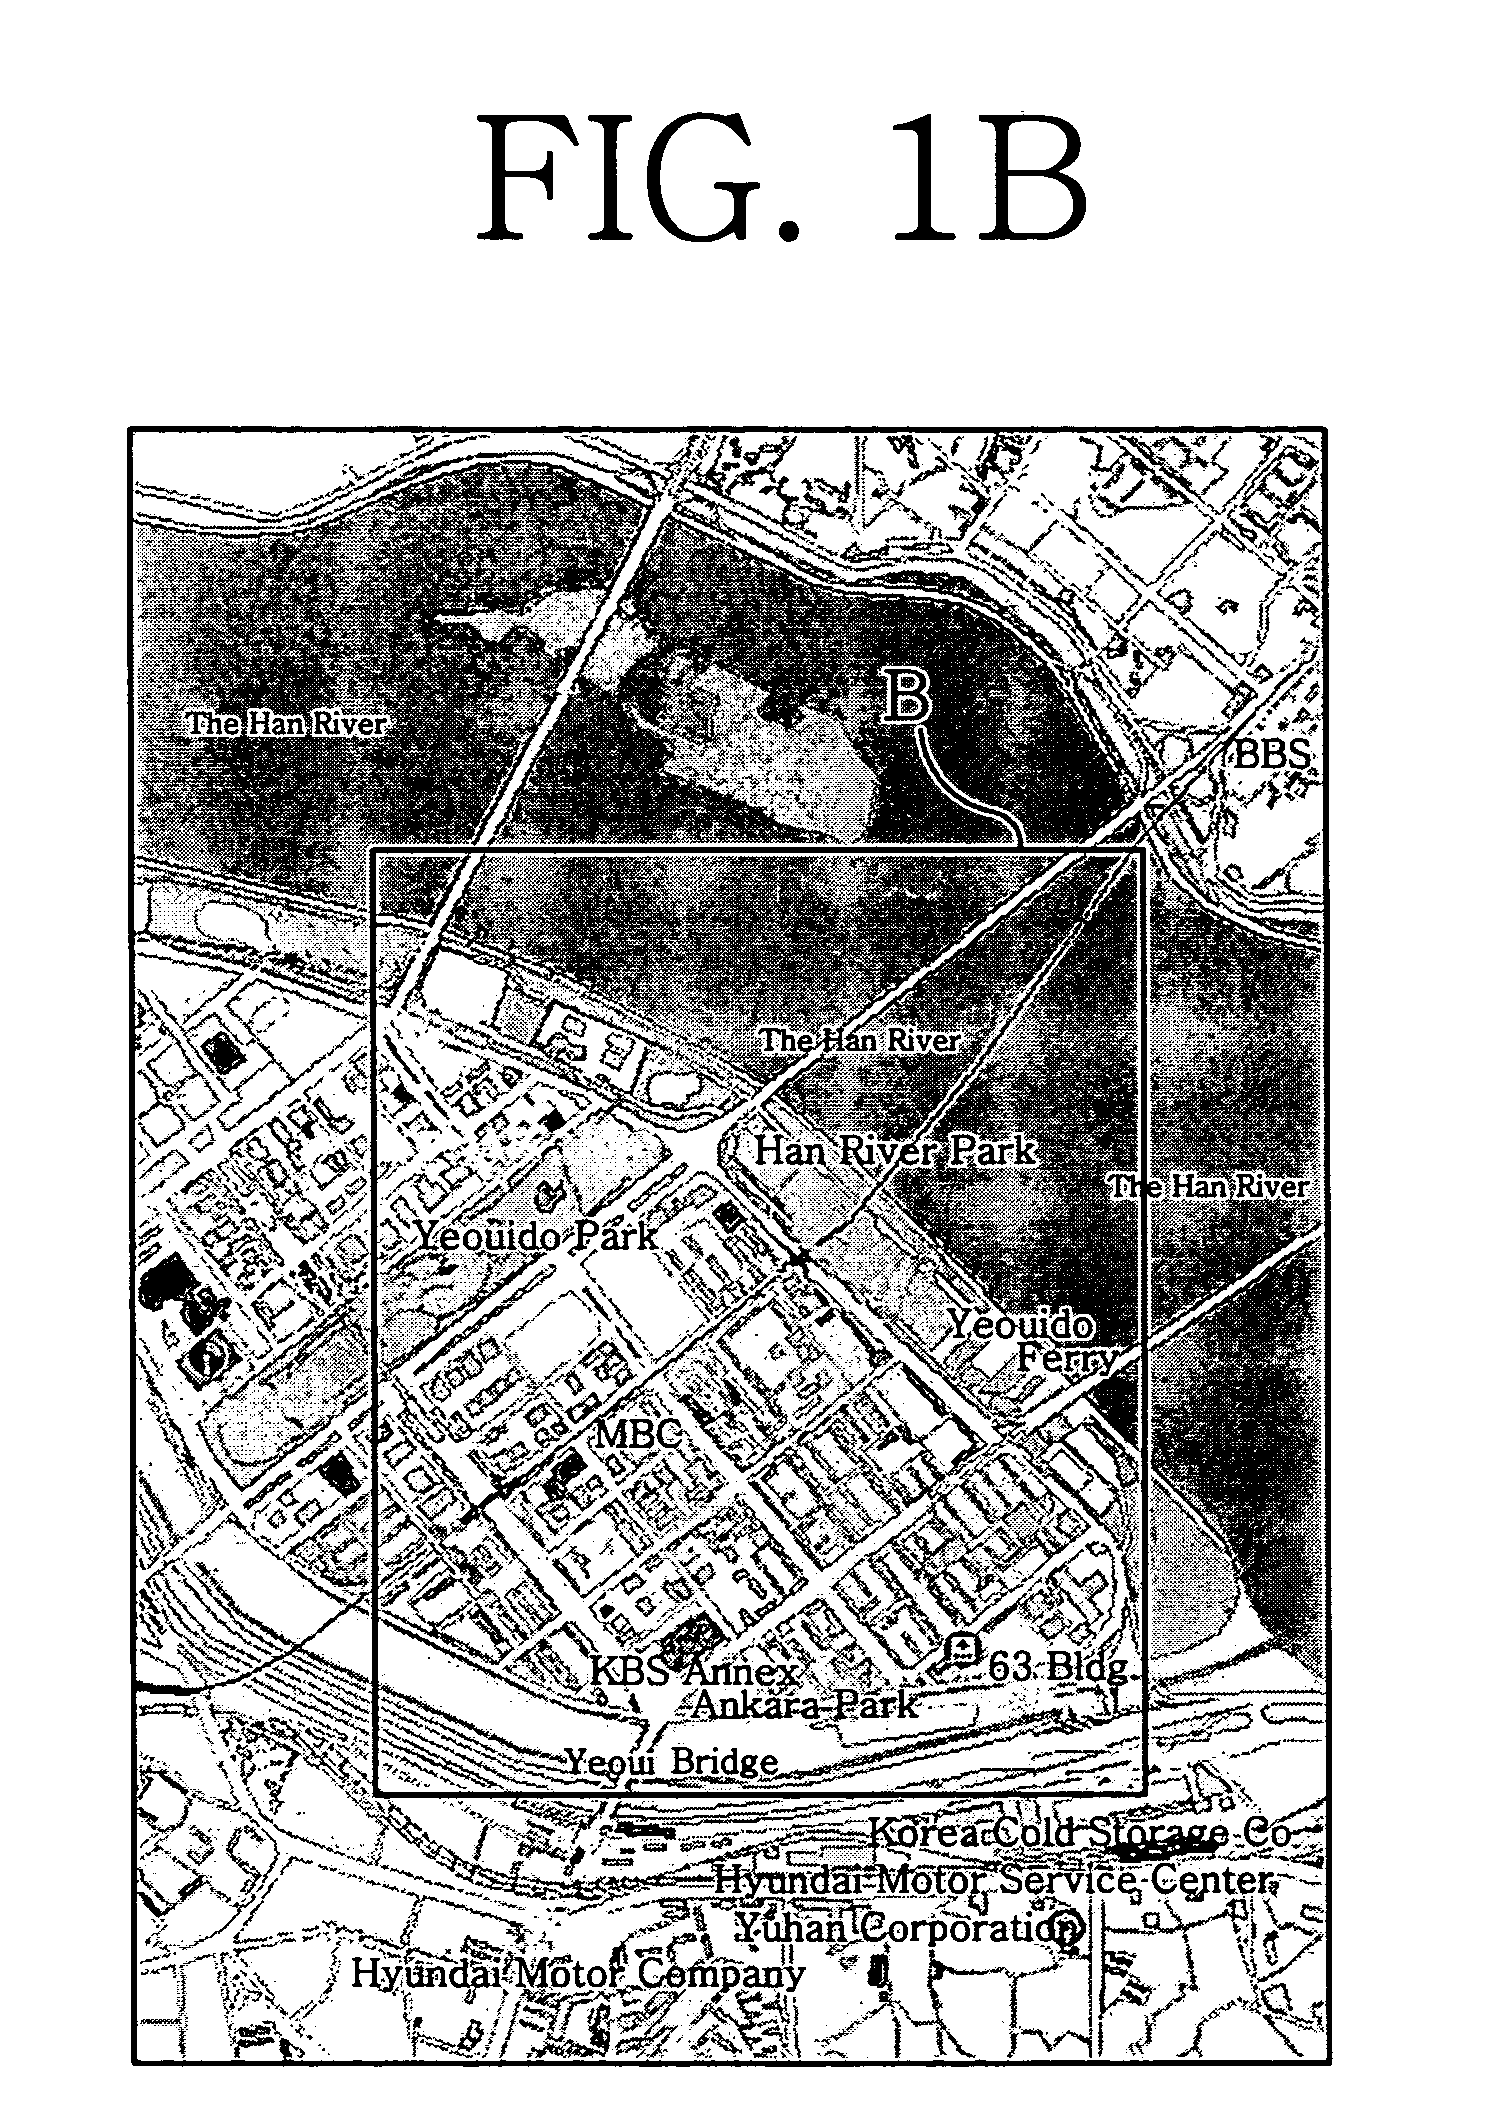 Method for displaying multi-level text data in three-dimensional map